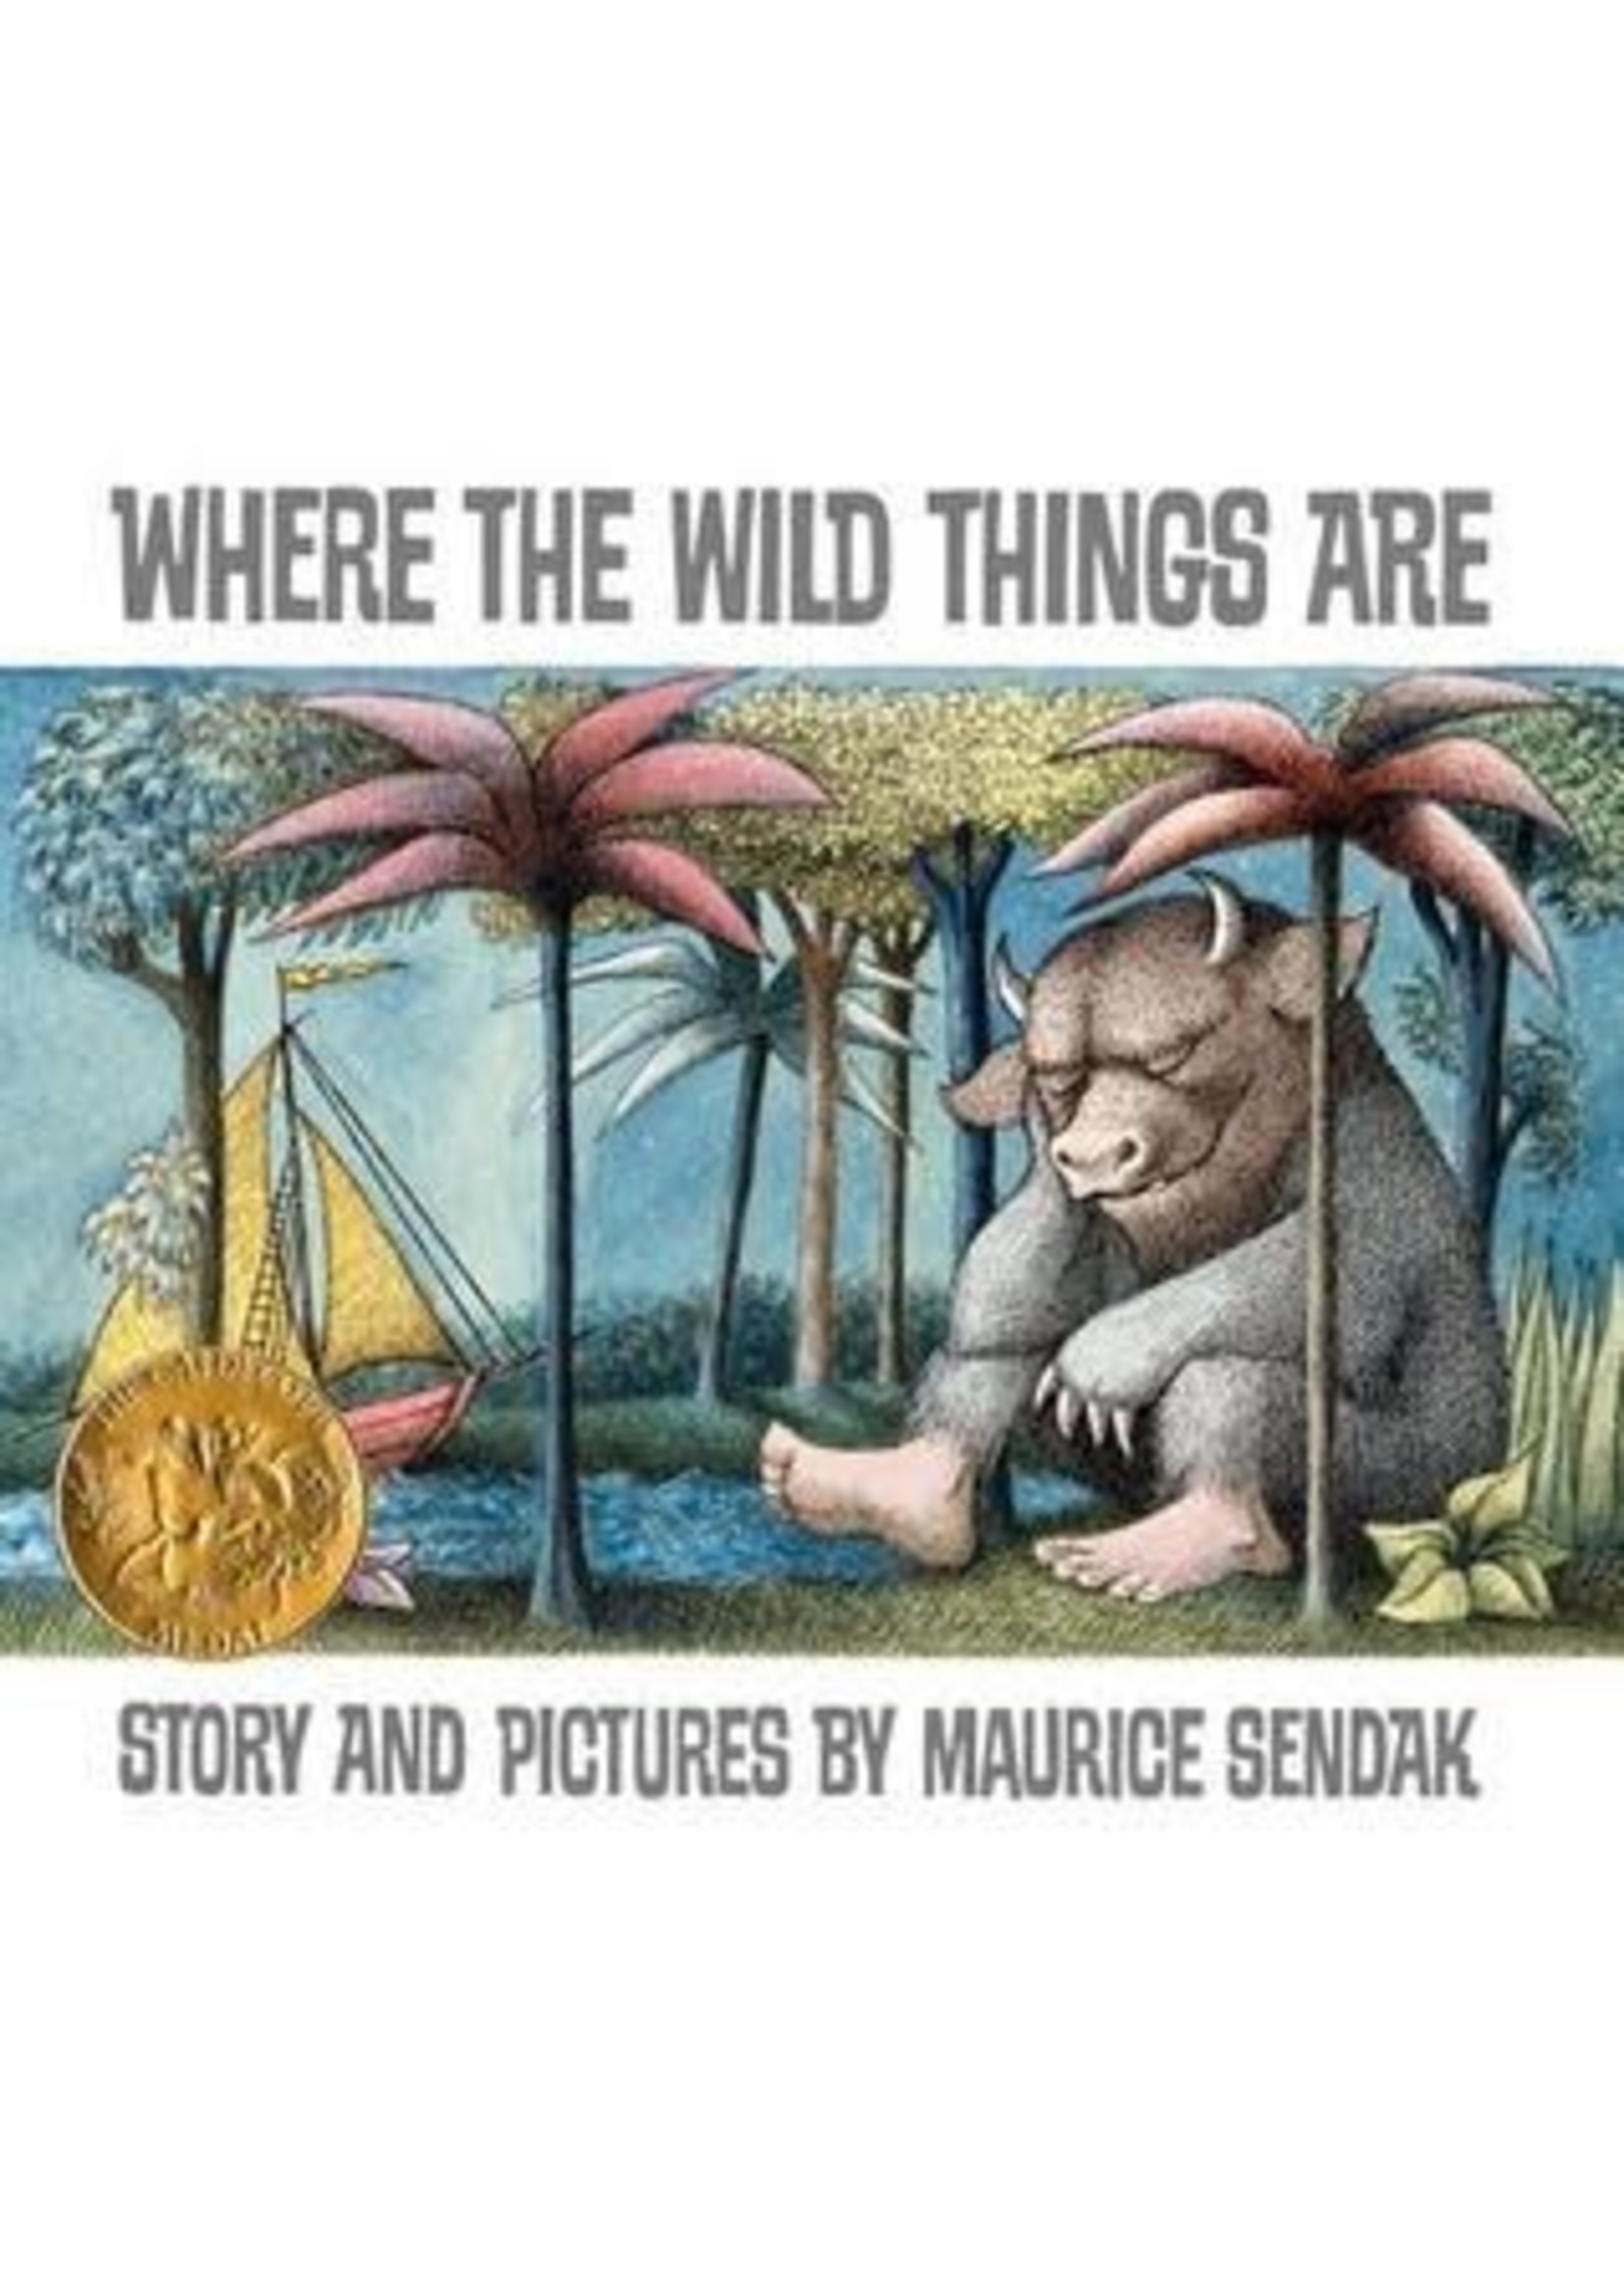 Where the Wild Things Are by Maurice Sendak